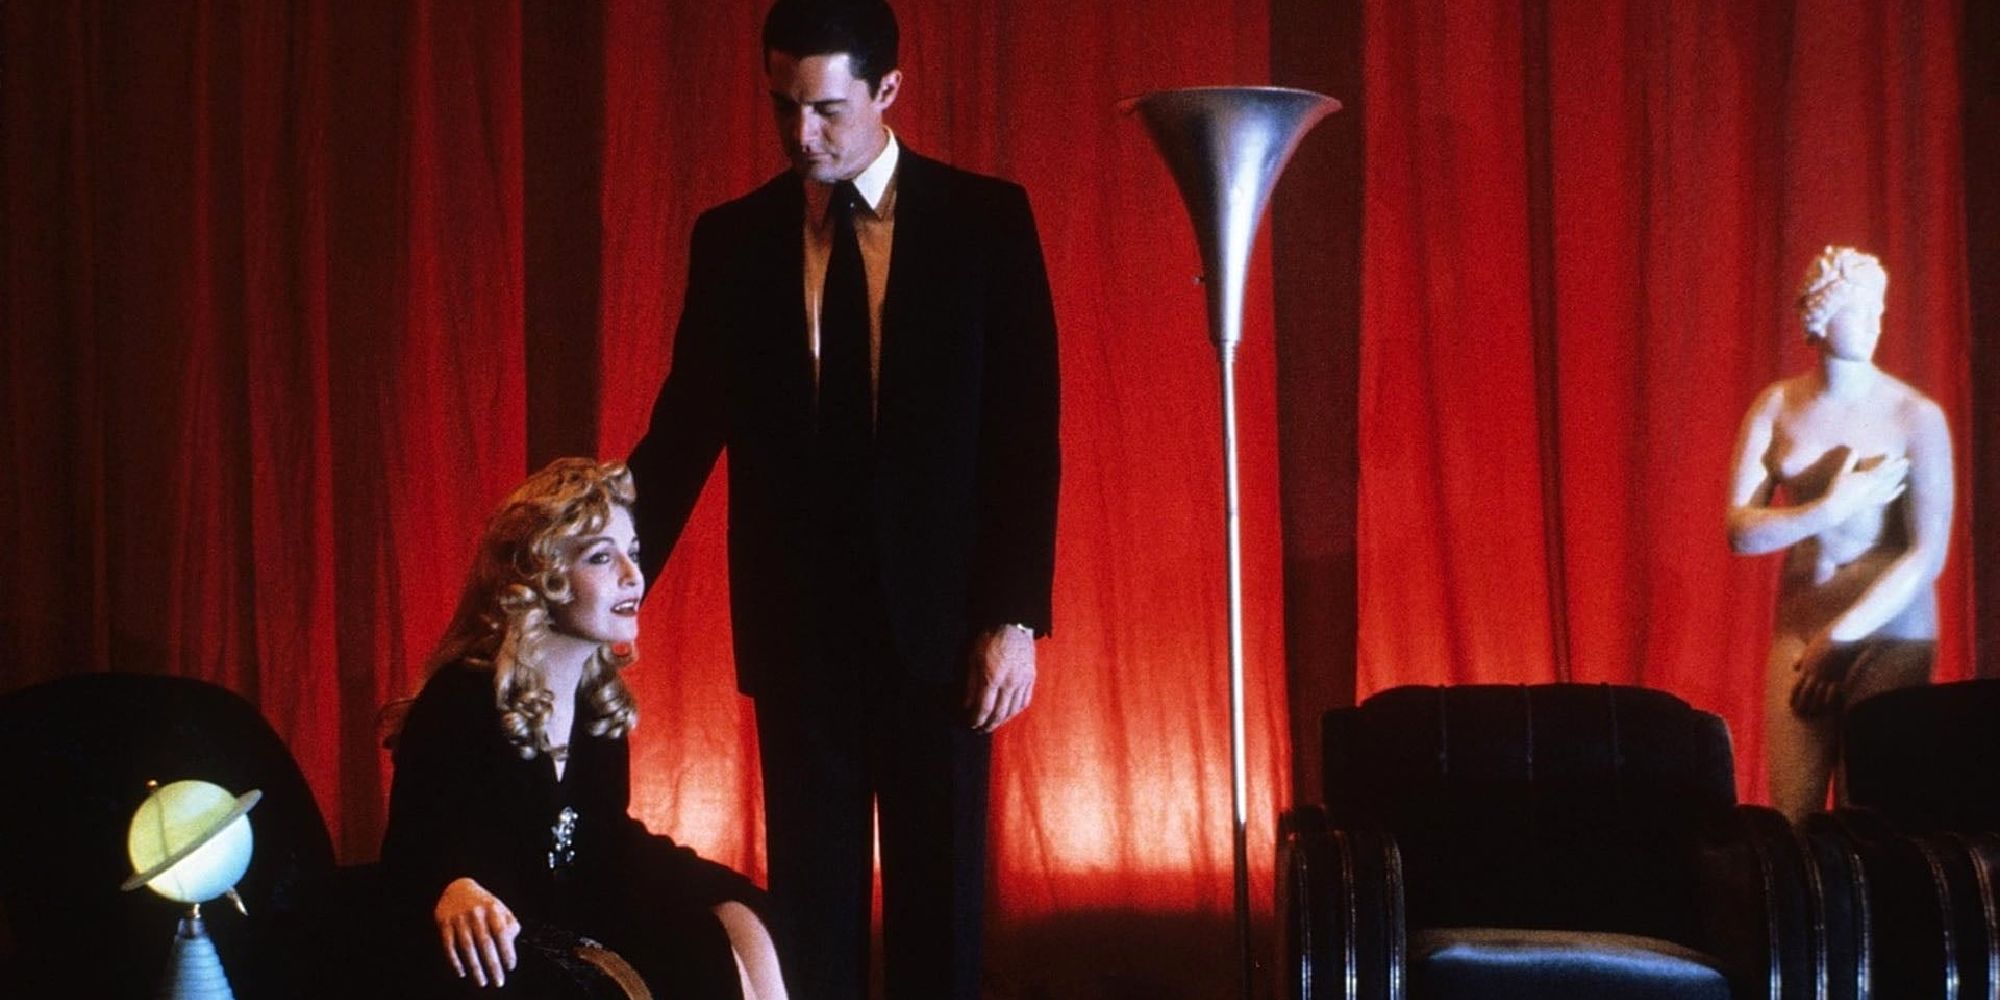 Kyle MacLachlan and Sheryl Lee as Dale Cooper and Laura Palmer in a room with red curtains in Twin Peaks: Fire Walk With Me